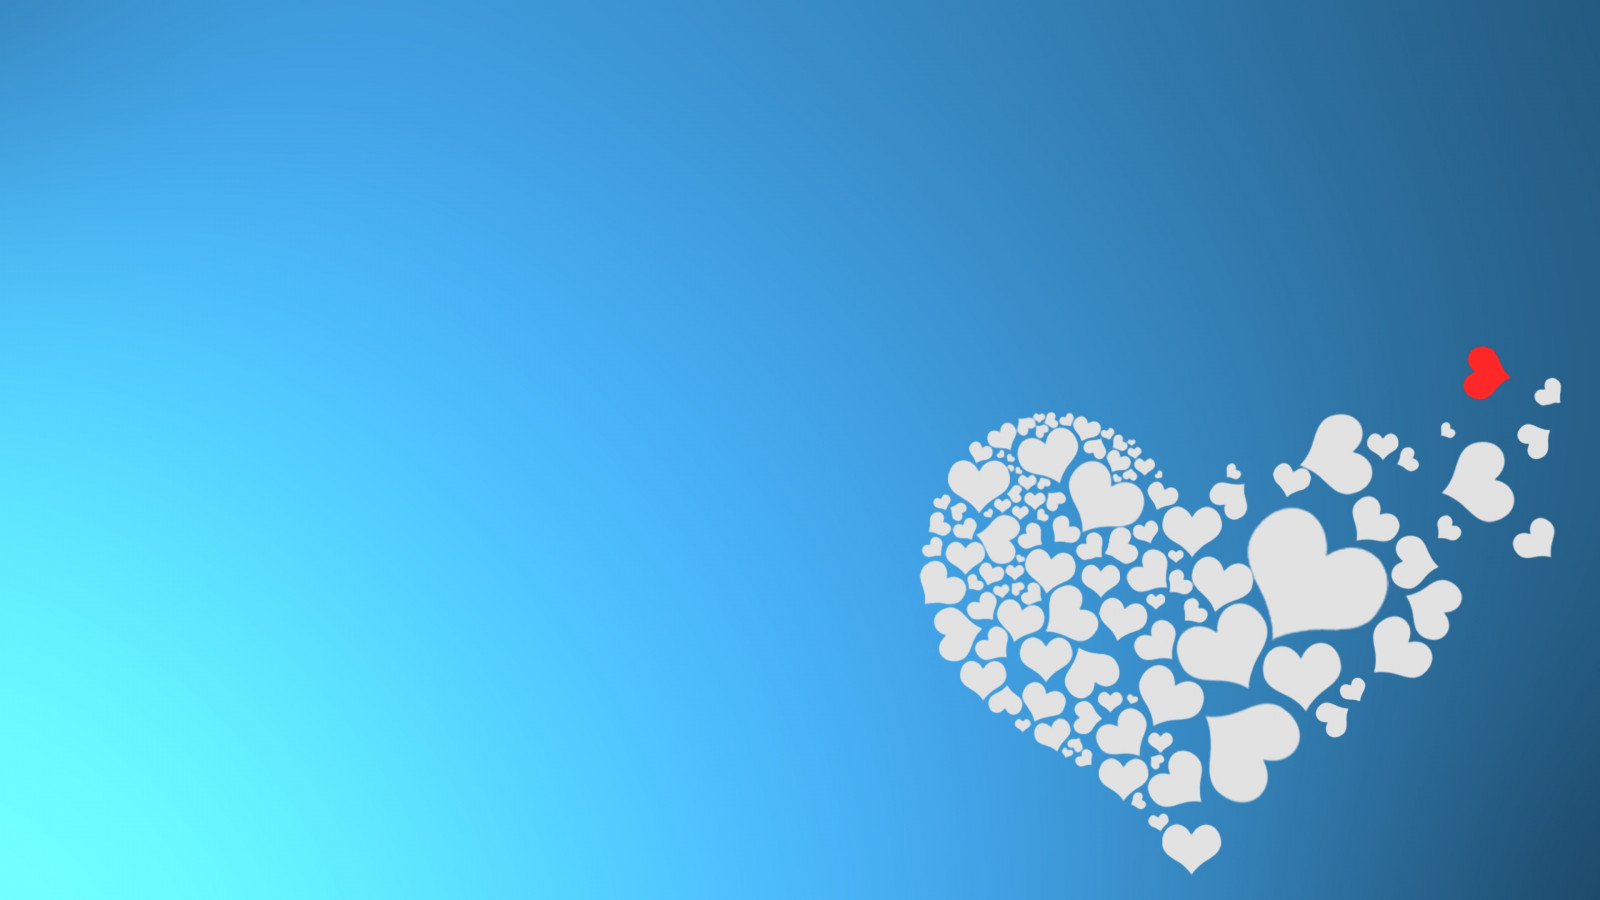 The hearts of love wallpaper 1600x900